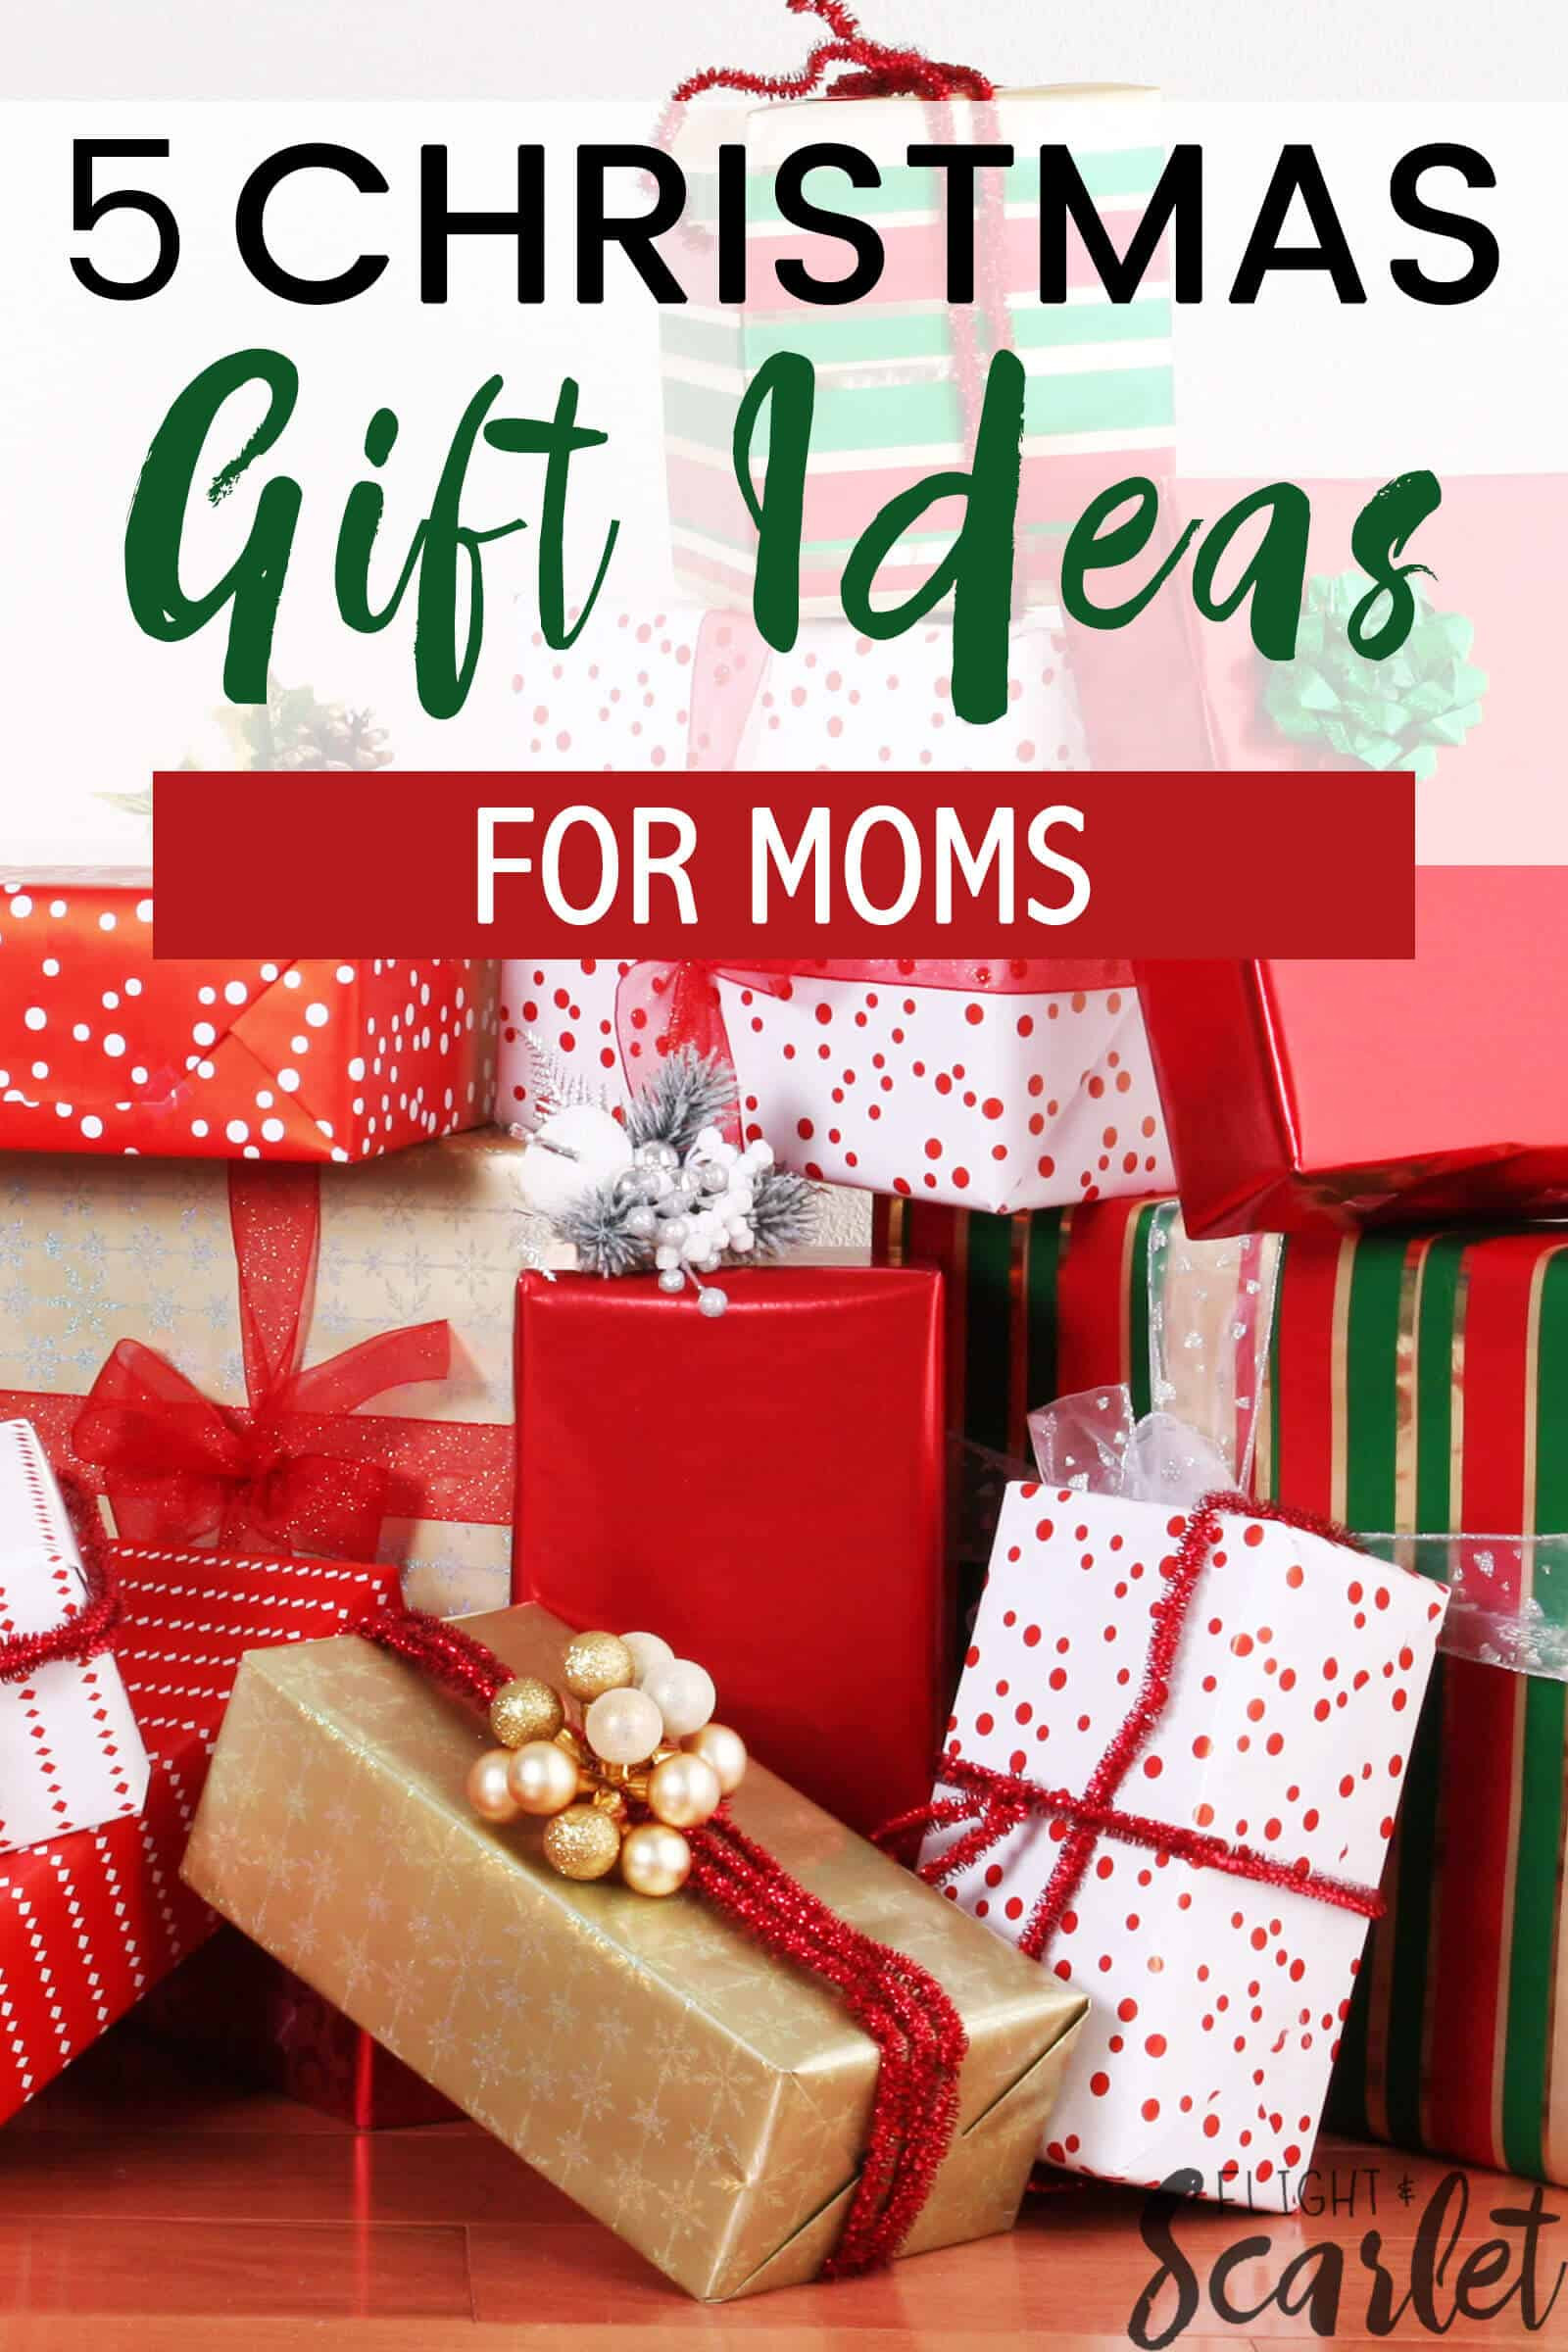 Holiday Gift Ideas For Mom
 5 Bud Friendly Gift Ideas For Moms Flight & Scarlet